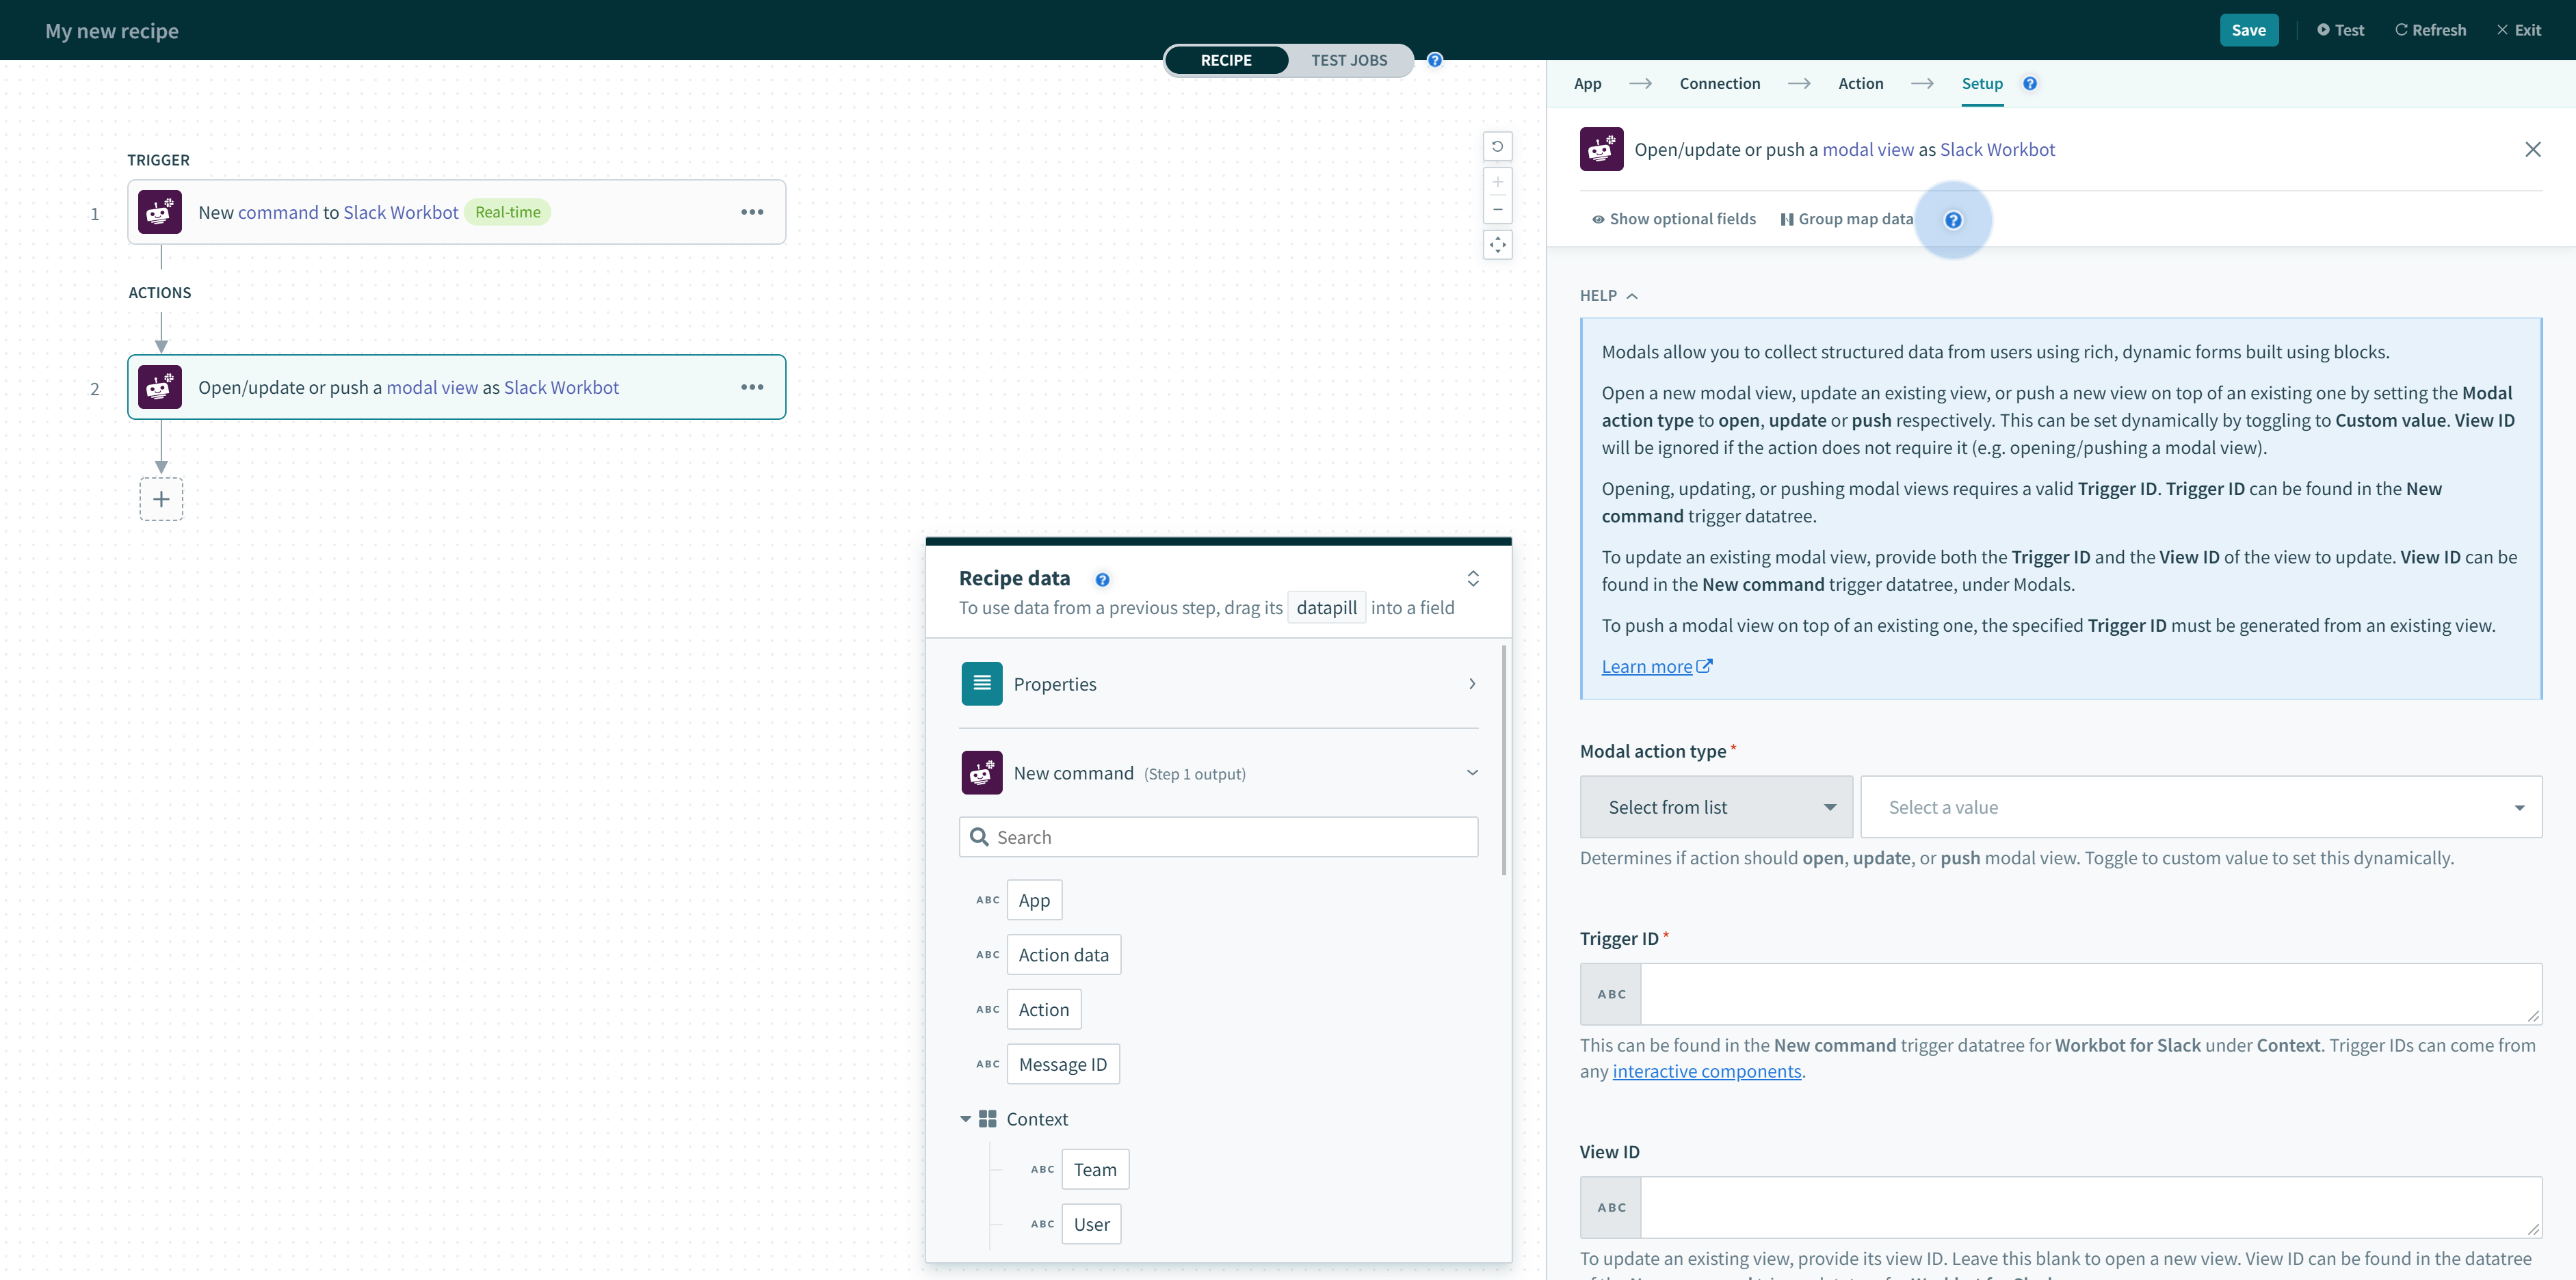 Open/update or push modal view